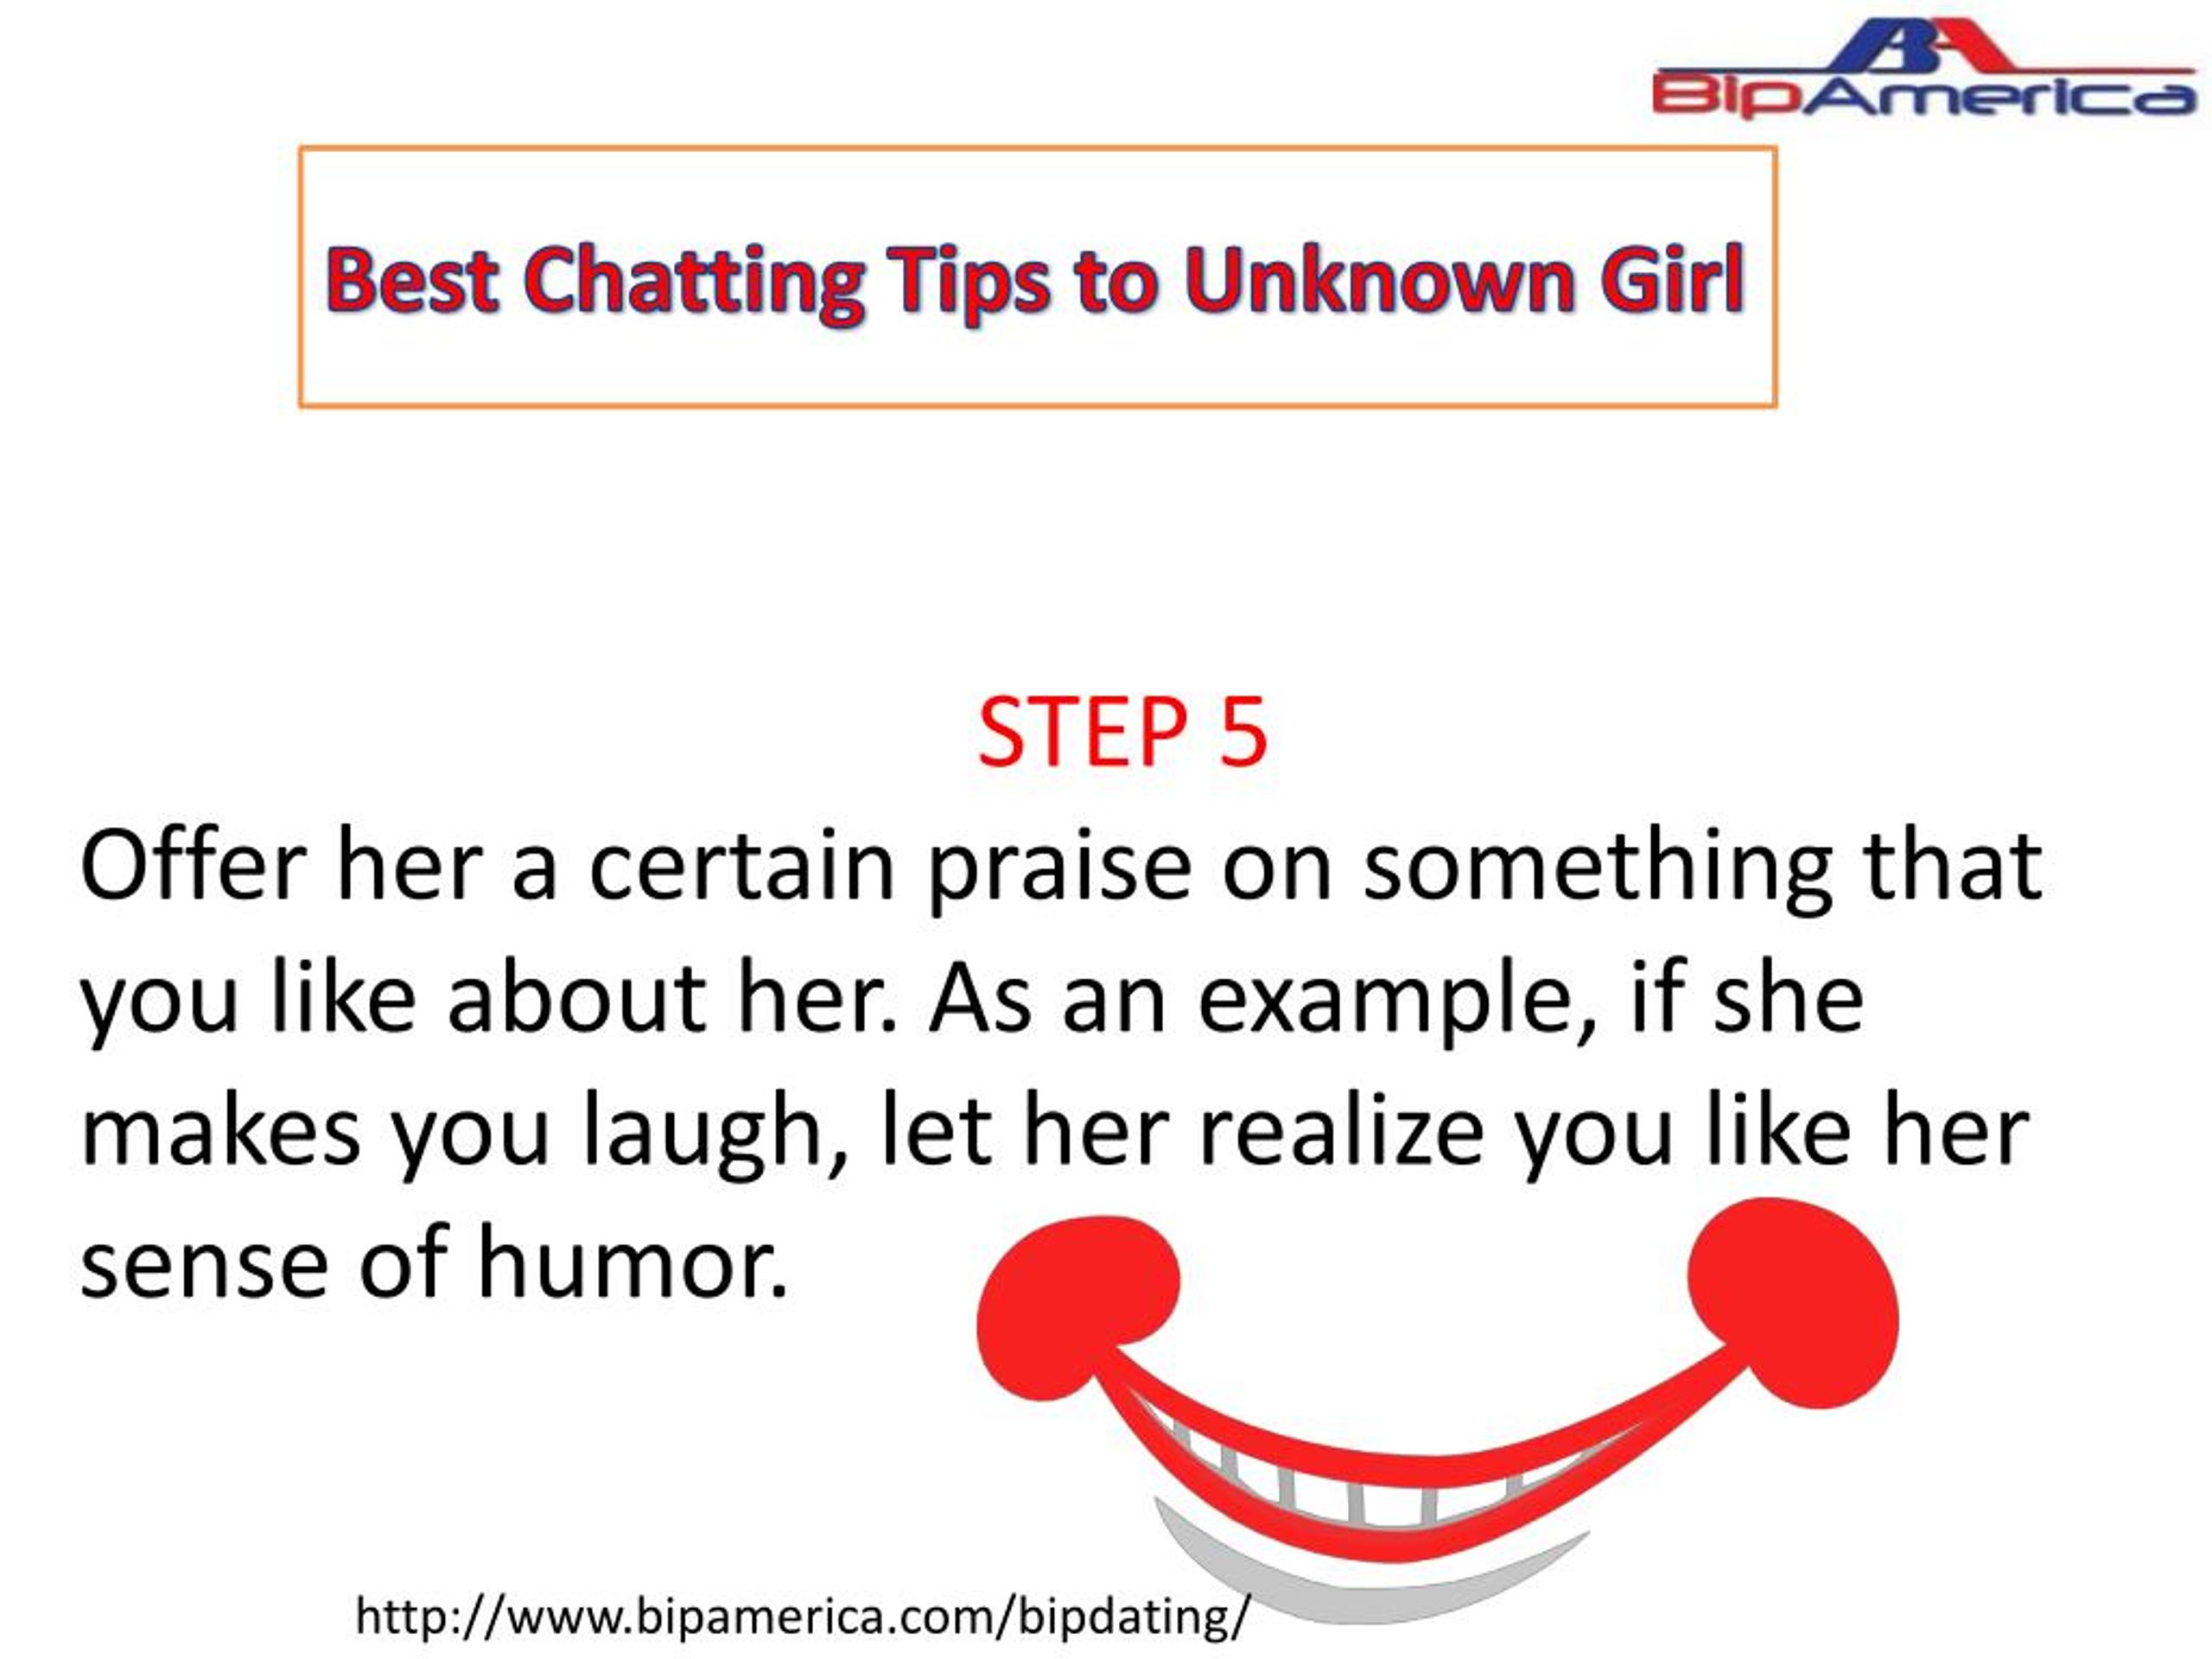 Best Chatting Tips to Unknown Girl.